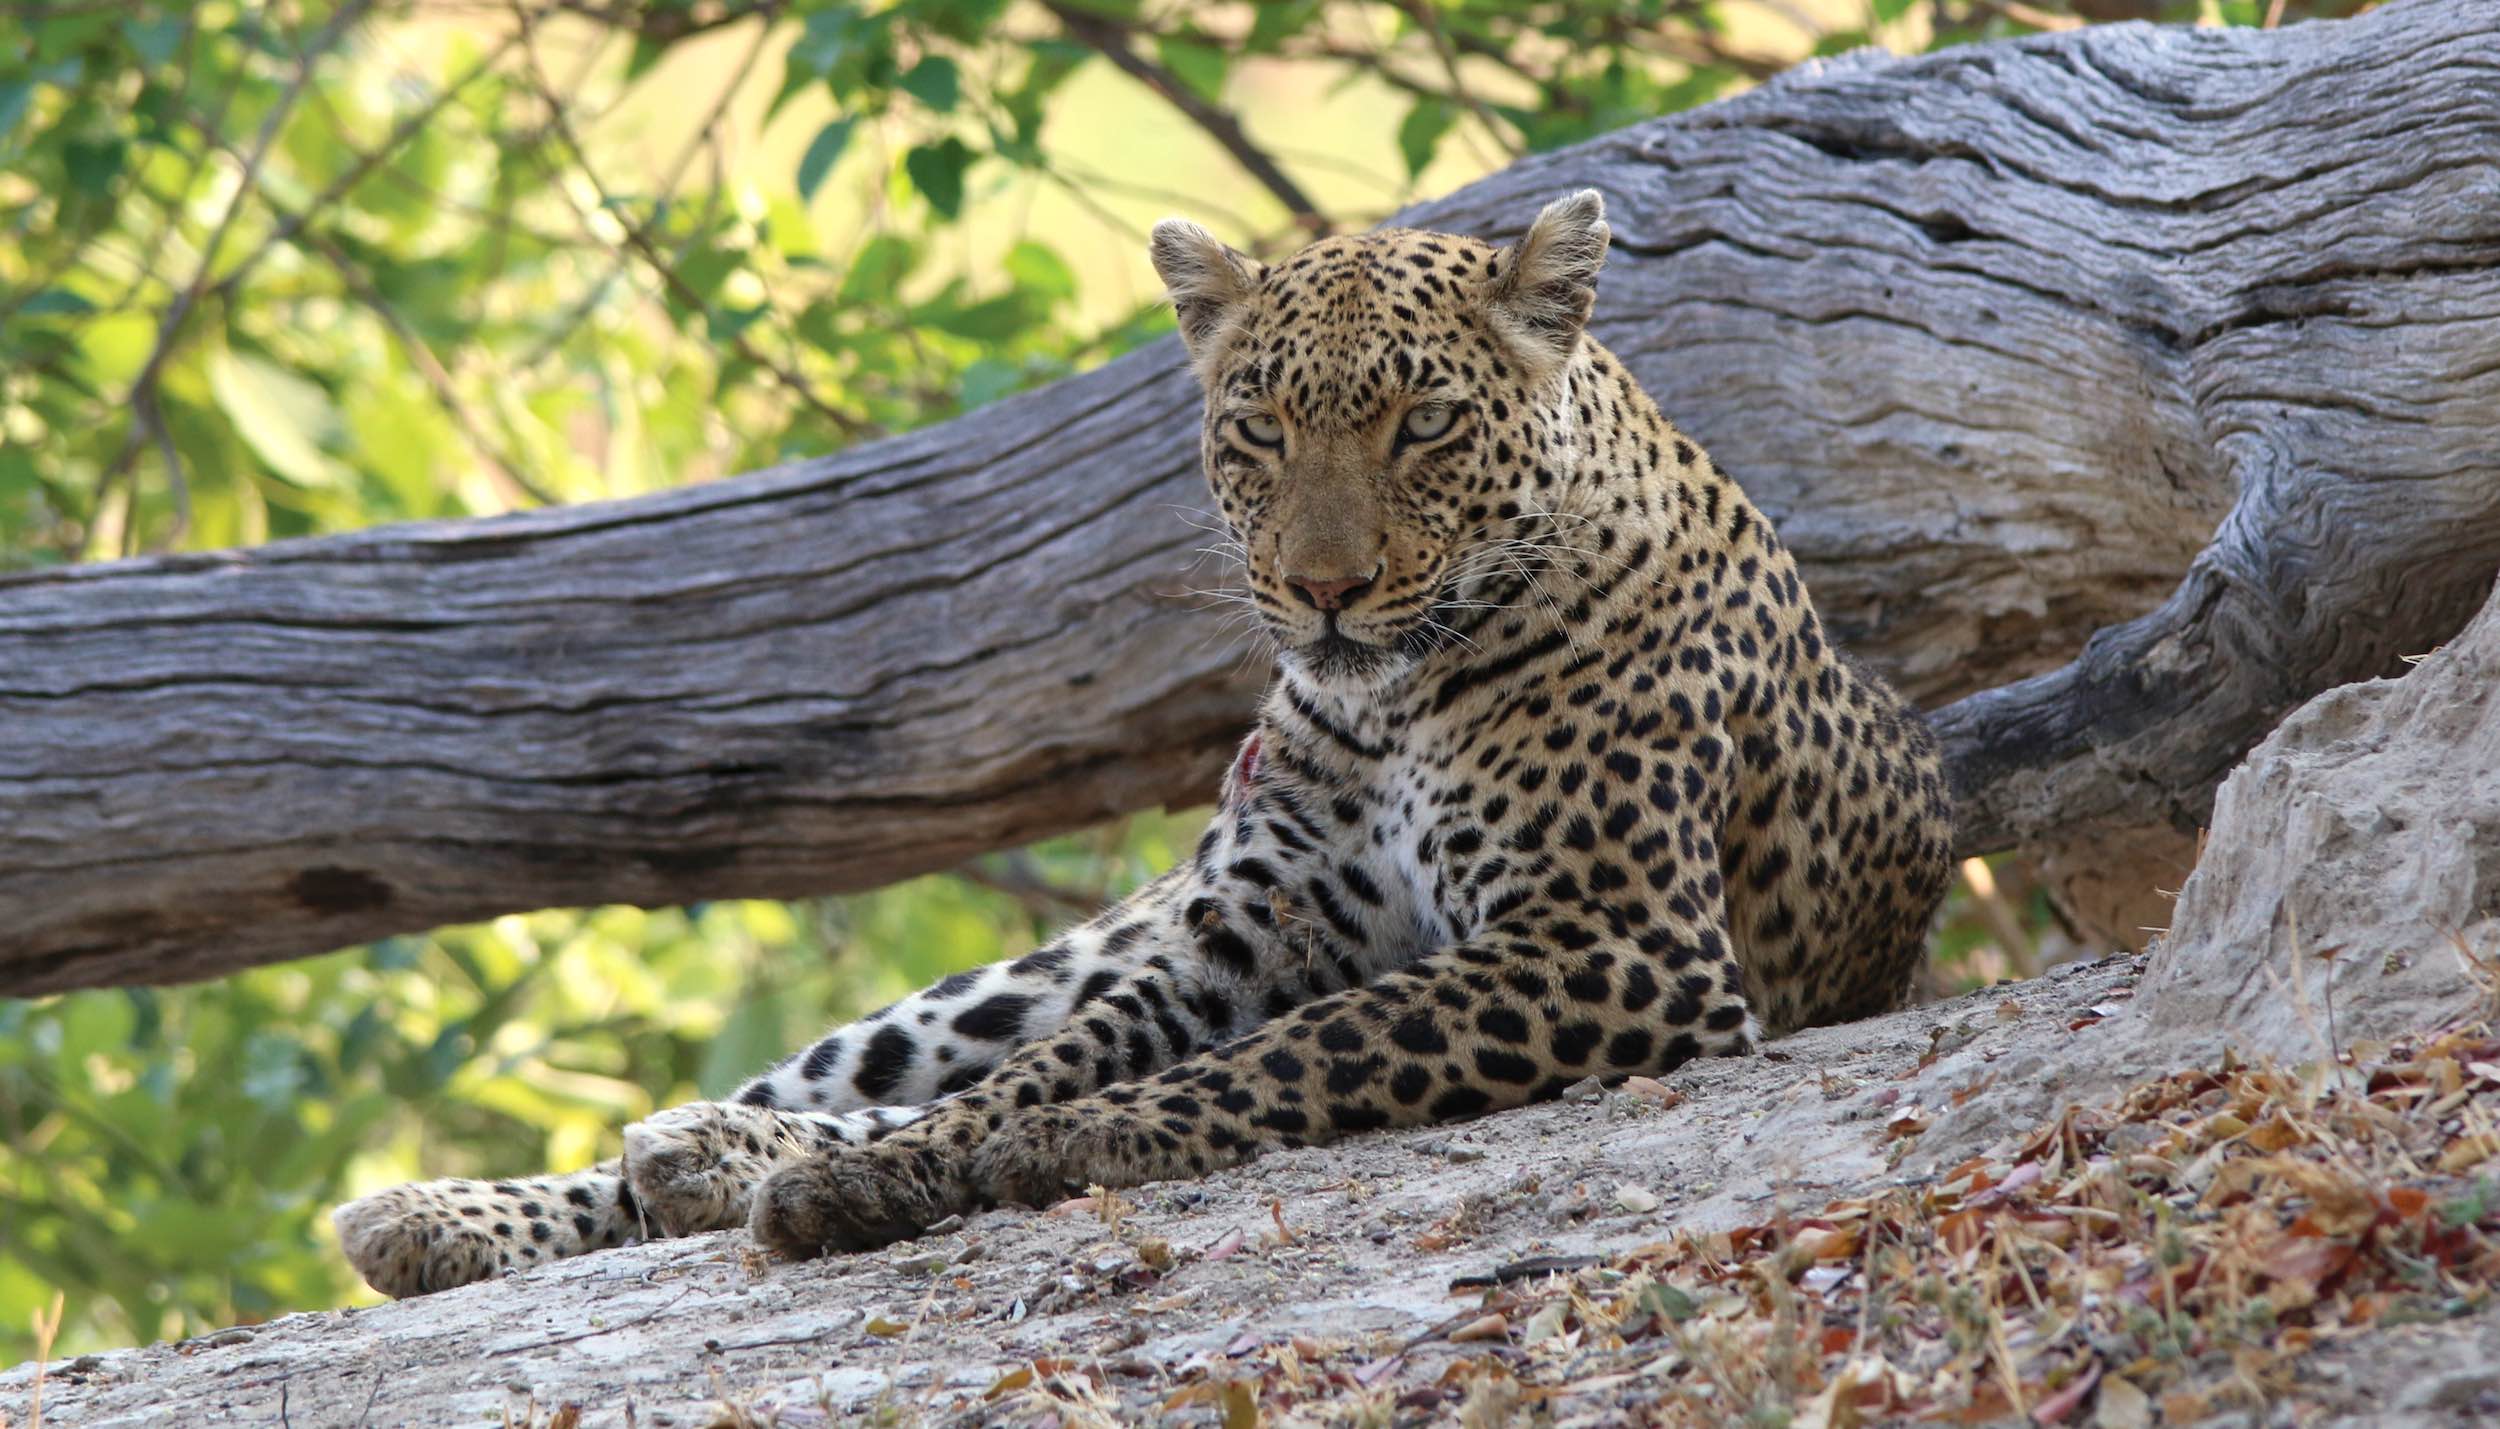 A very relaxed looking leopard.